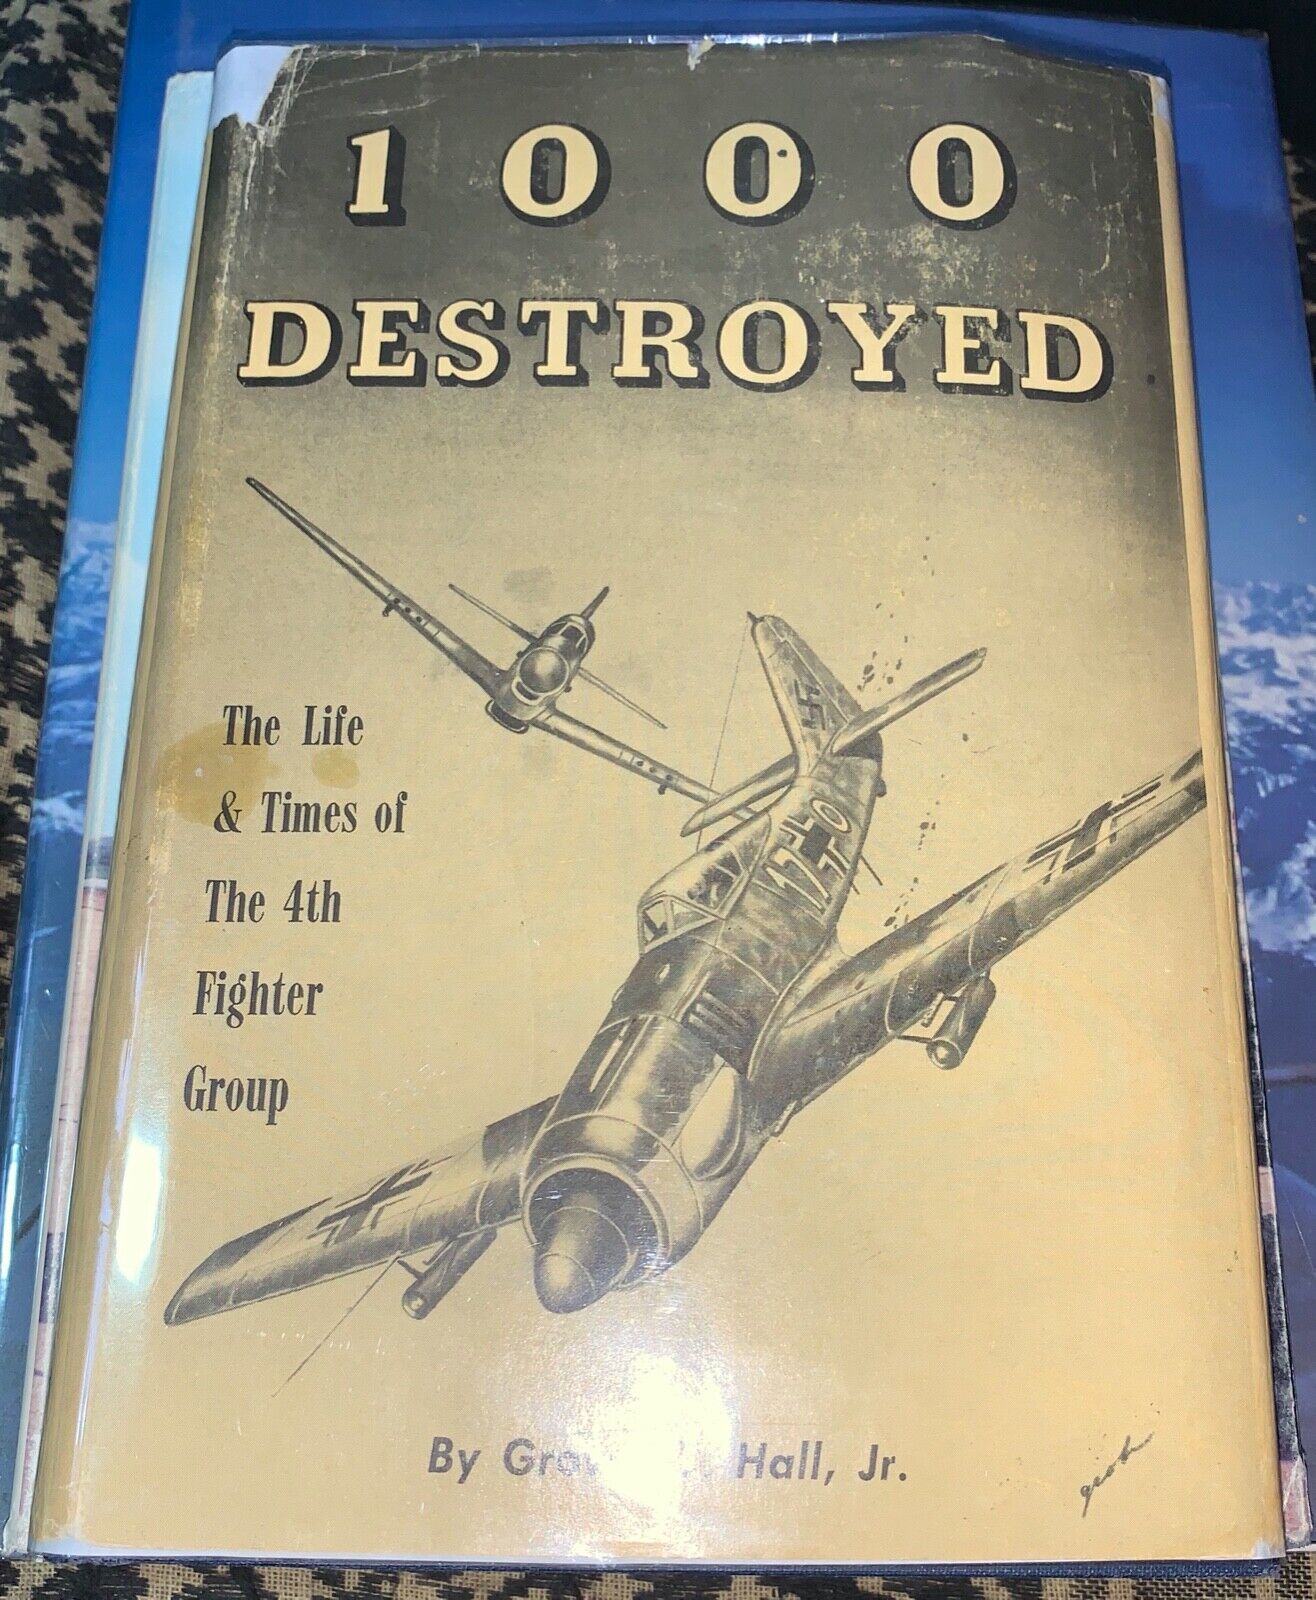 1000 DESTROYED 4TH FG UNIT HISTORY By Grover C. Hall FREE USA SHIPPING